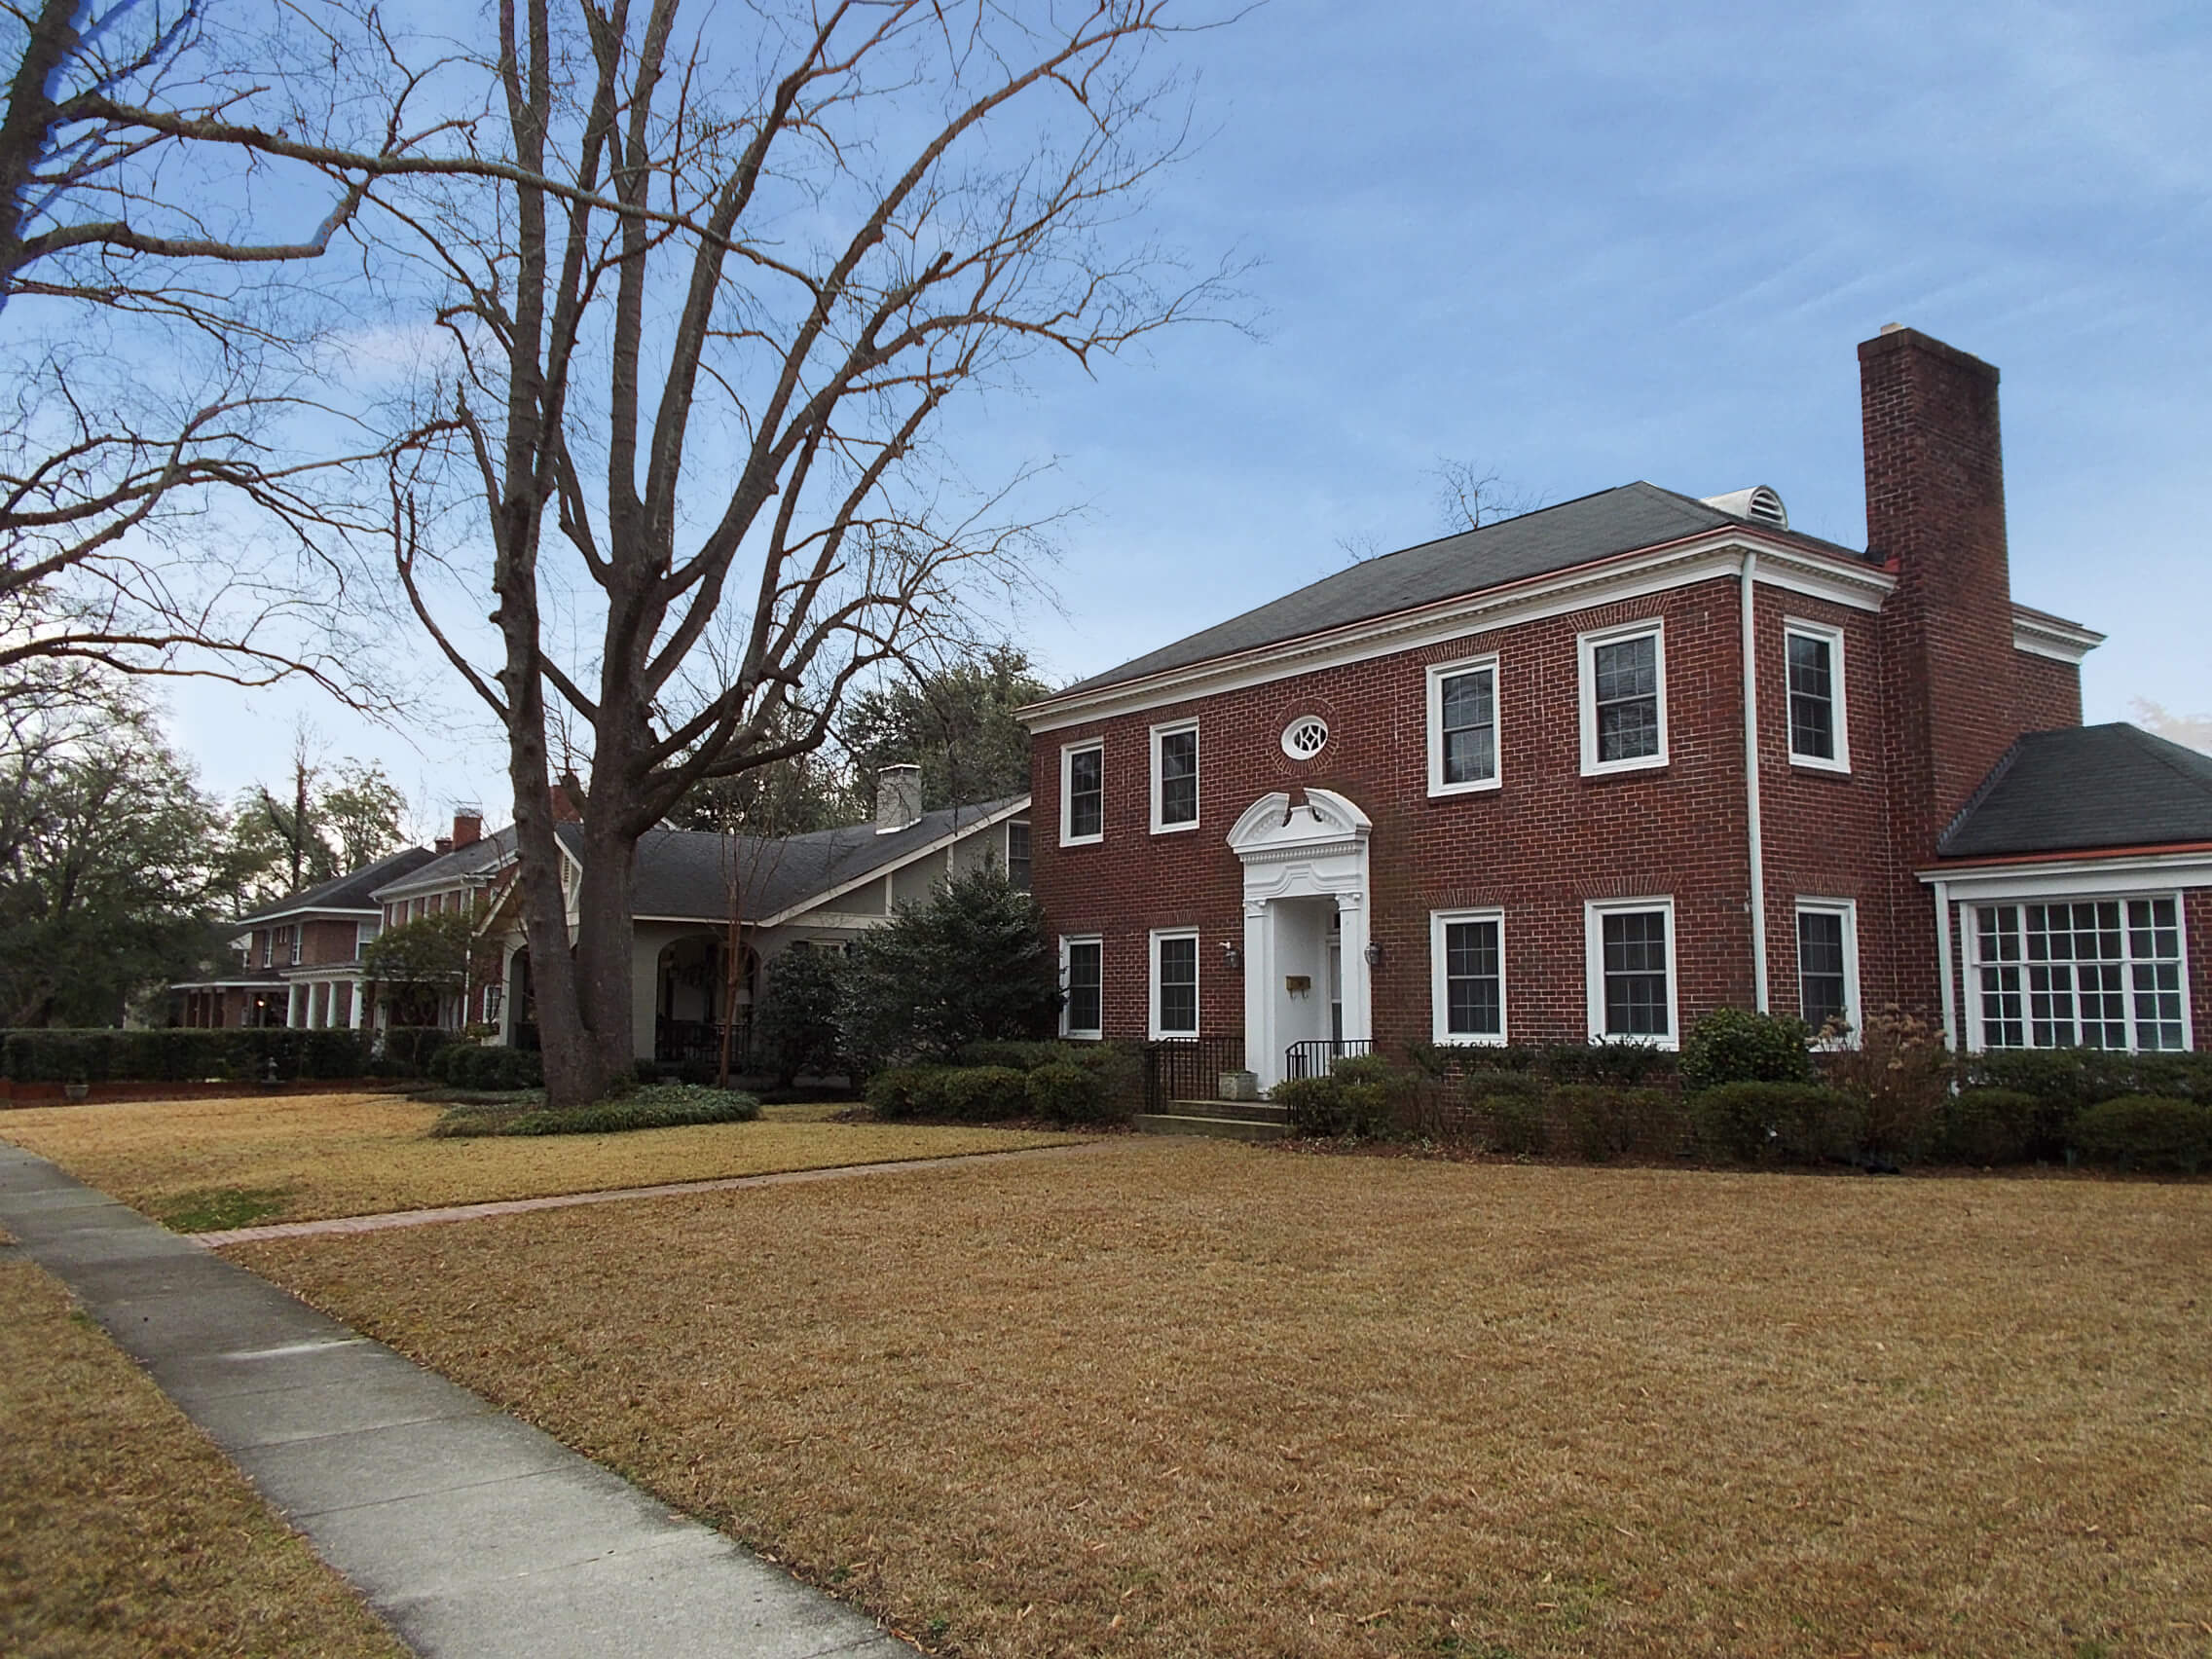 Photograph of a two story brick home in the foreground, with other brick homes in the rear